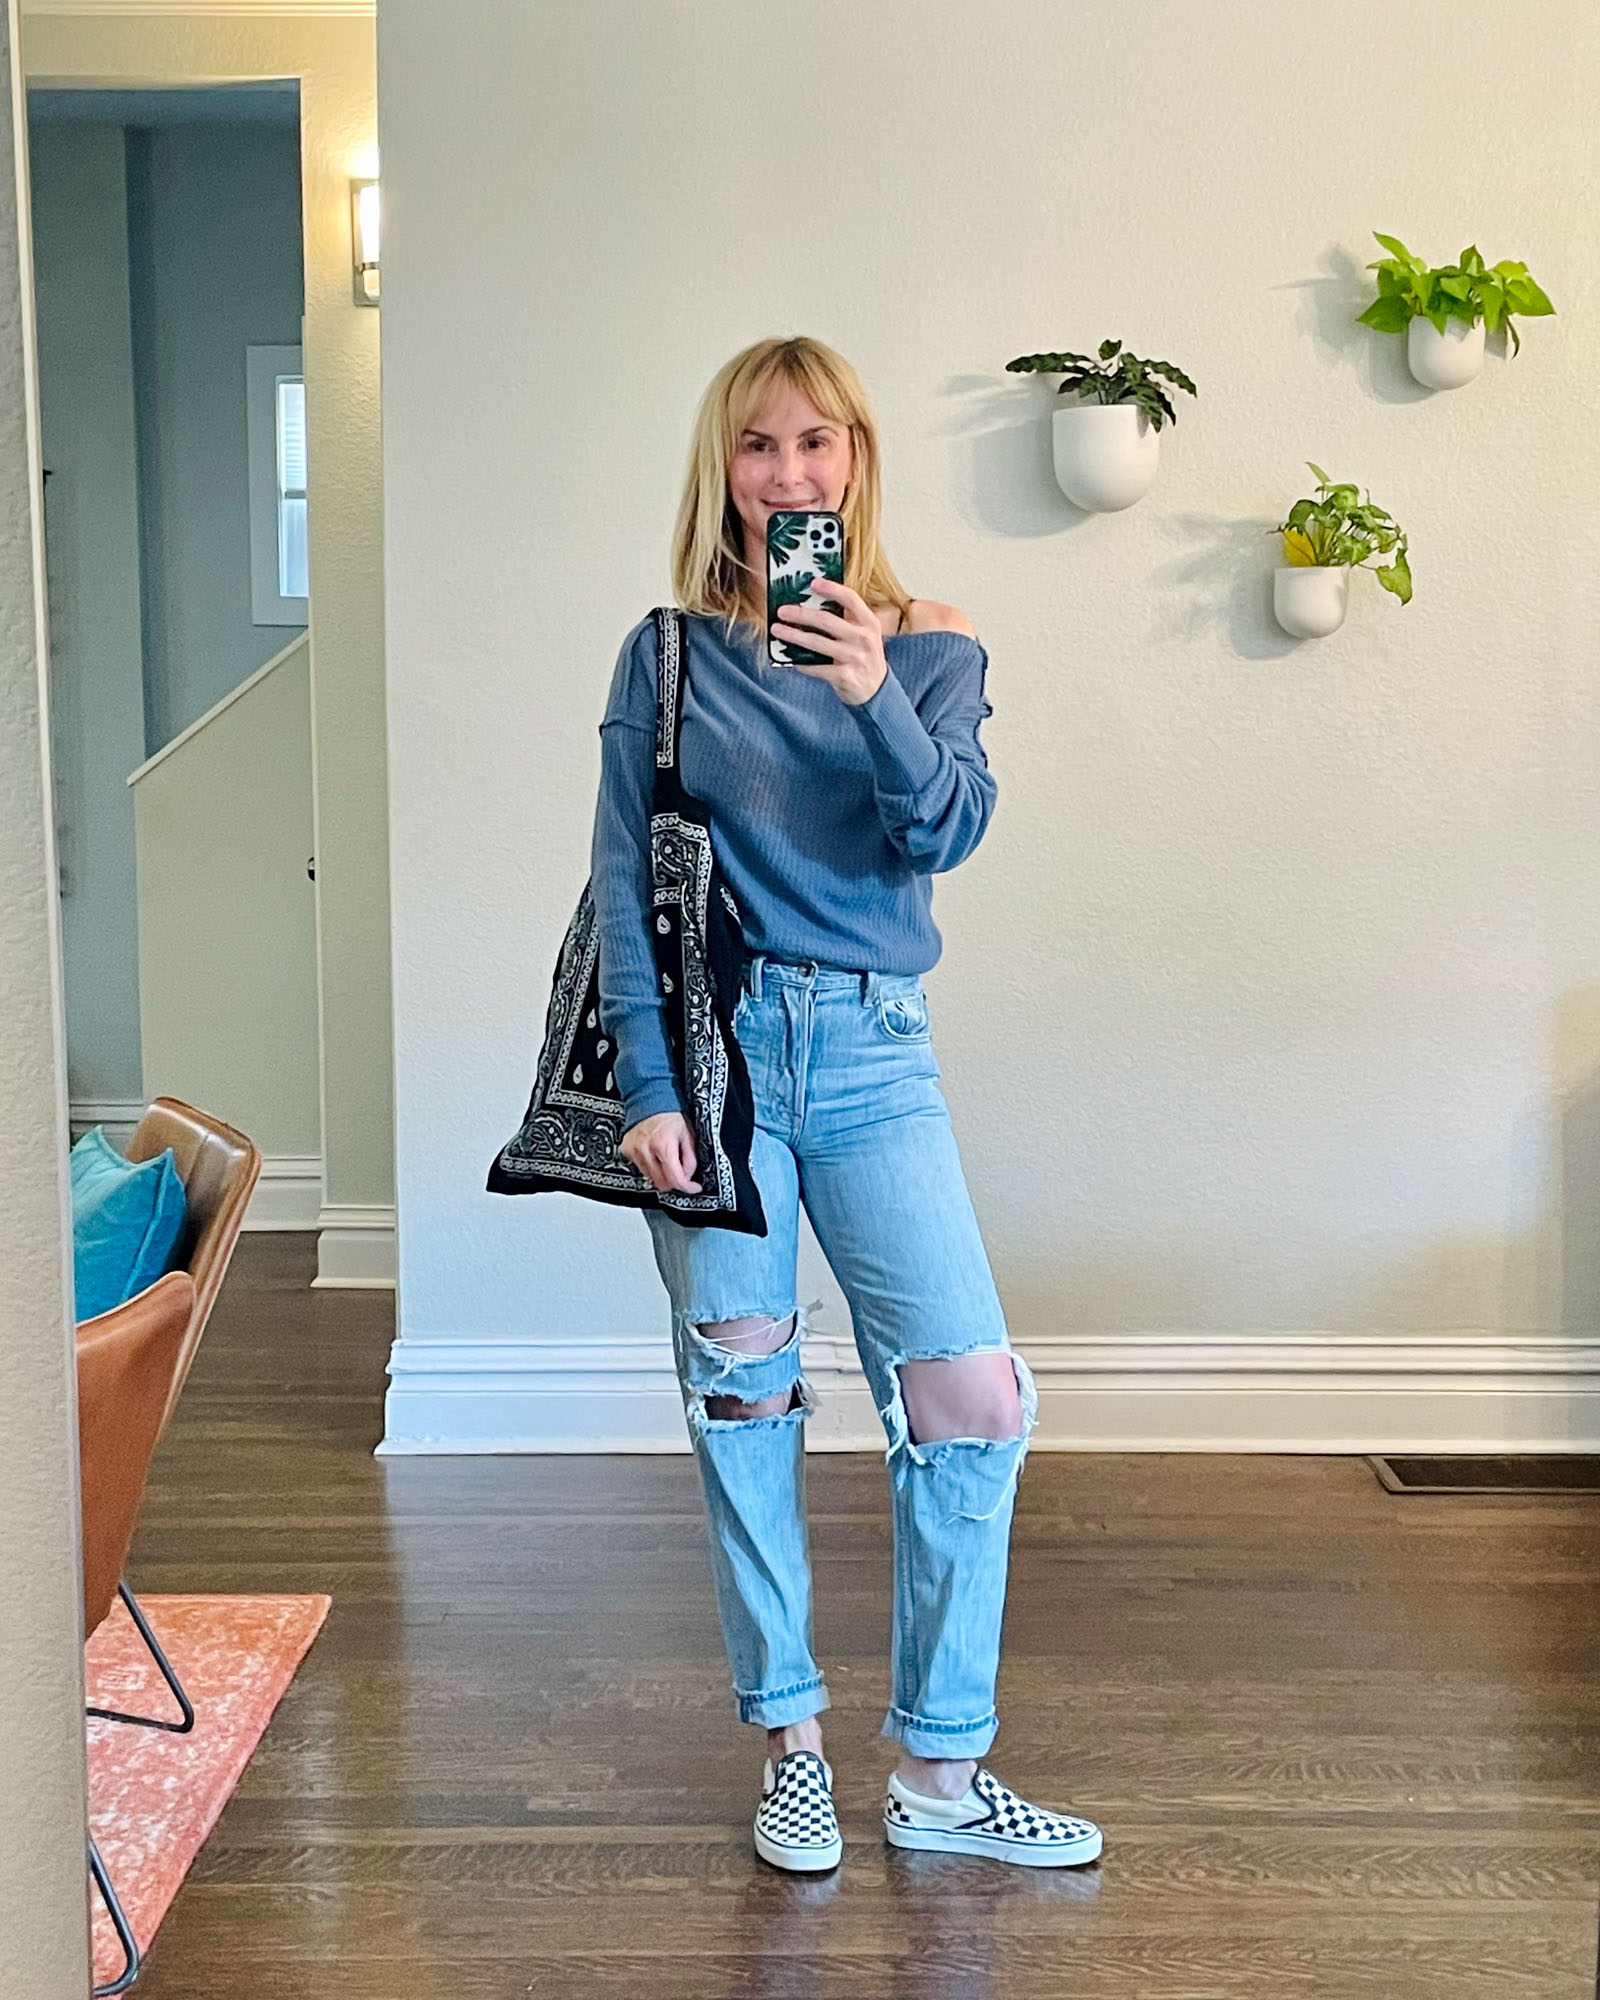 Wearing the Treasure and Bond off the shoulder top in blue with ripped jeans, vans checkered sneakers, and an Arizona Love black bandana tote bag.